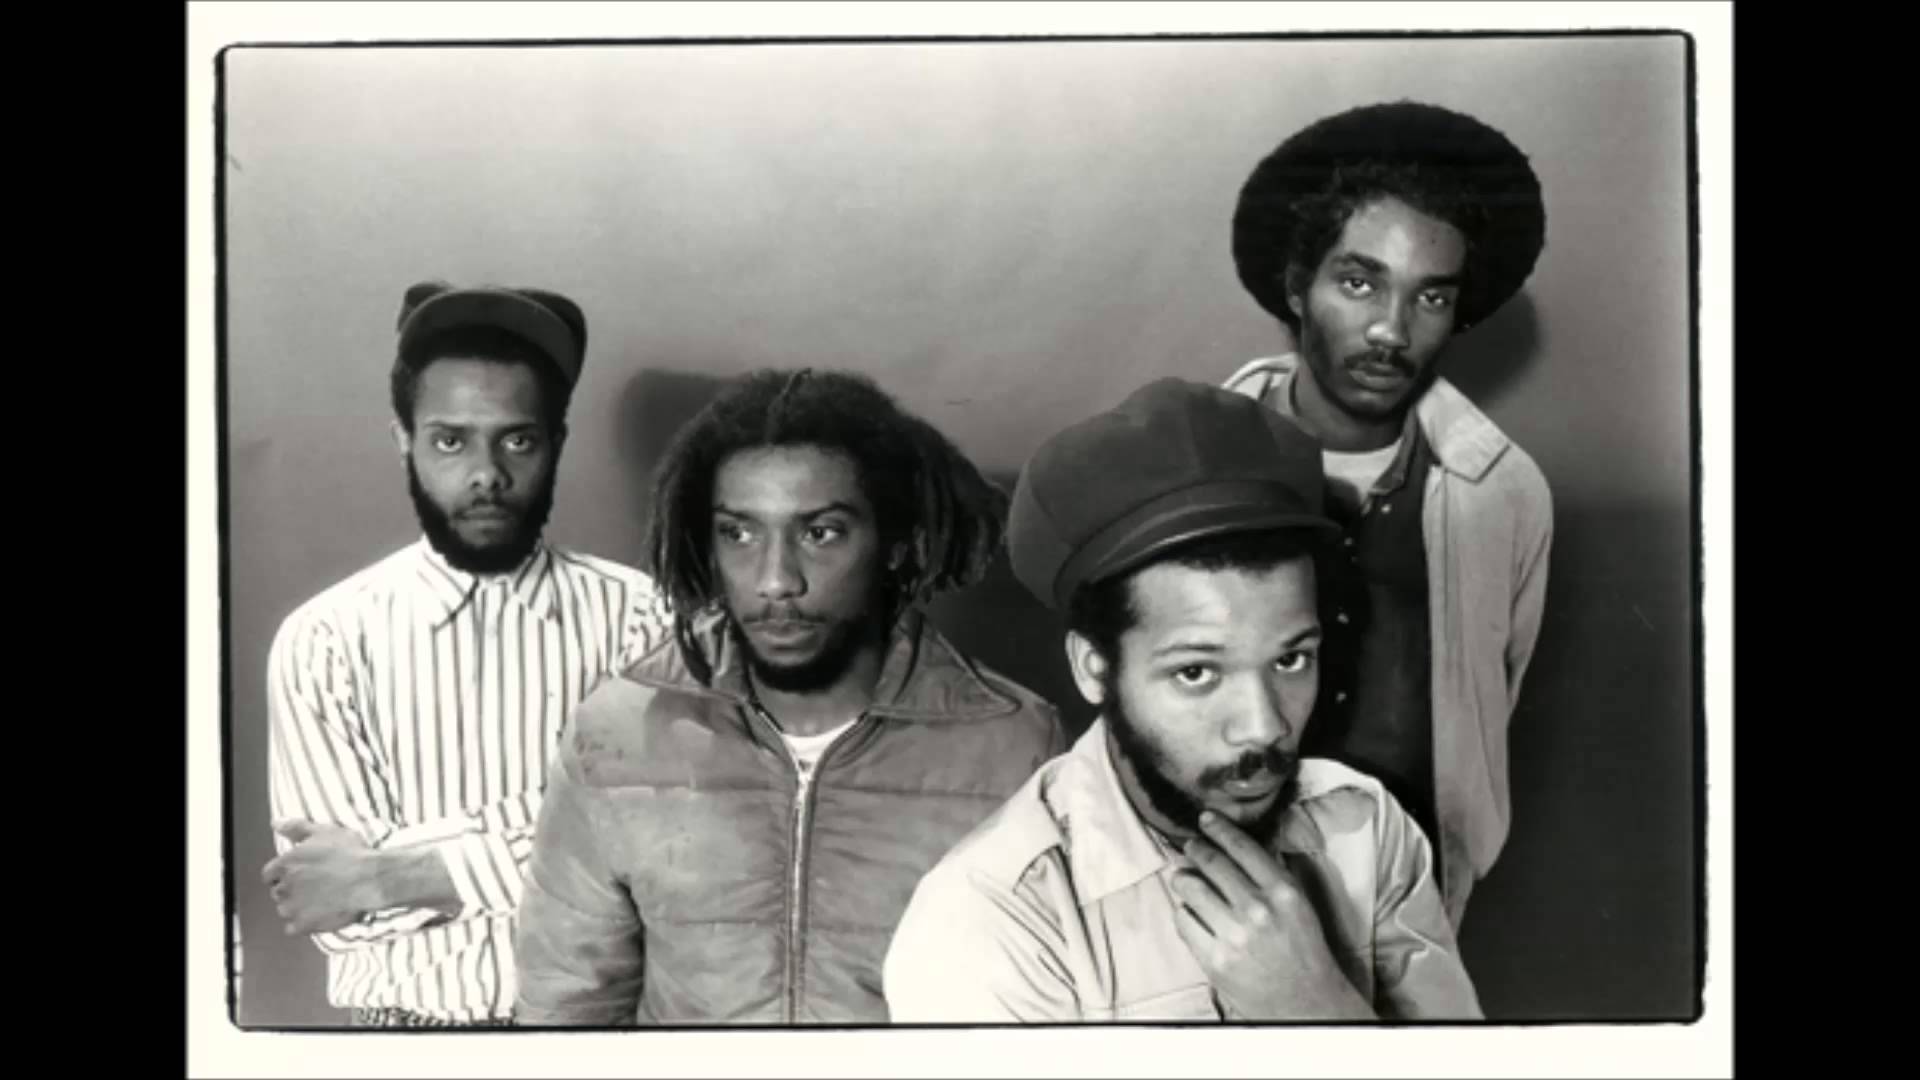 Bad Brains Wallpapers